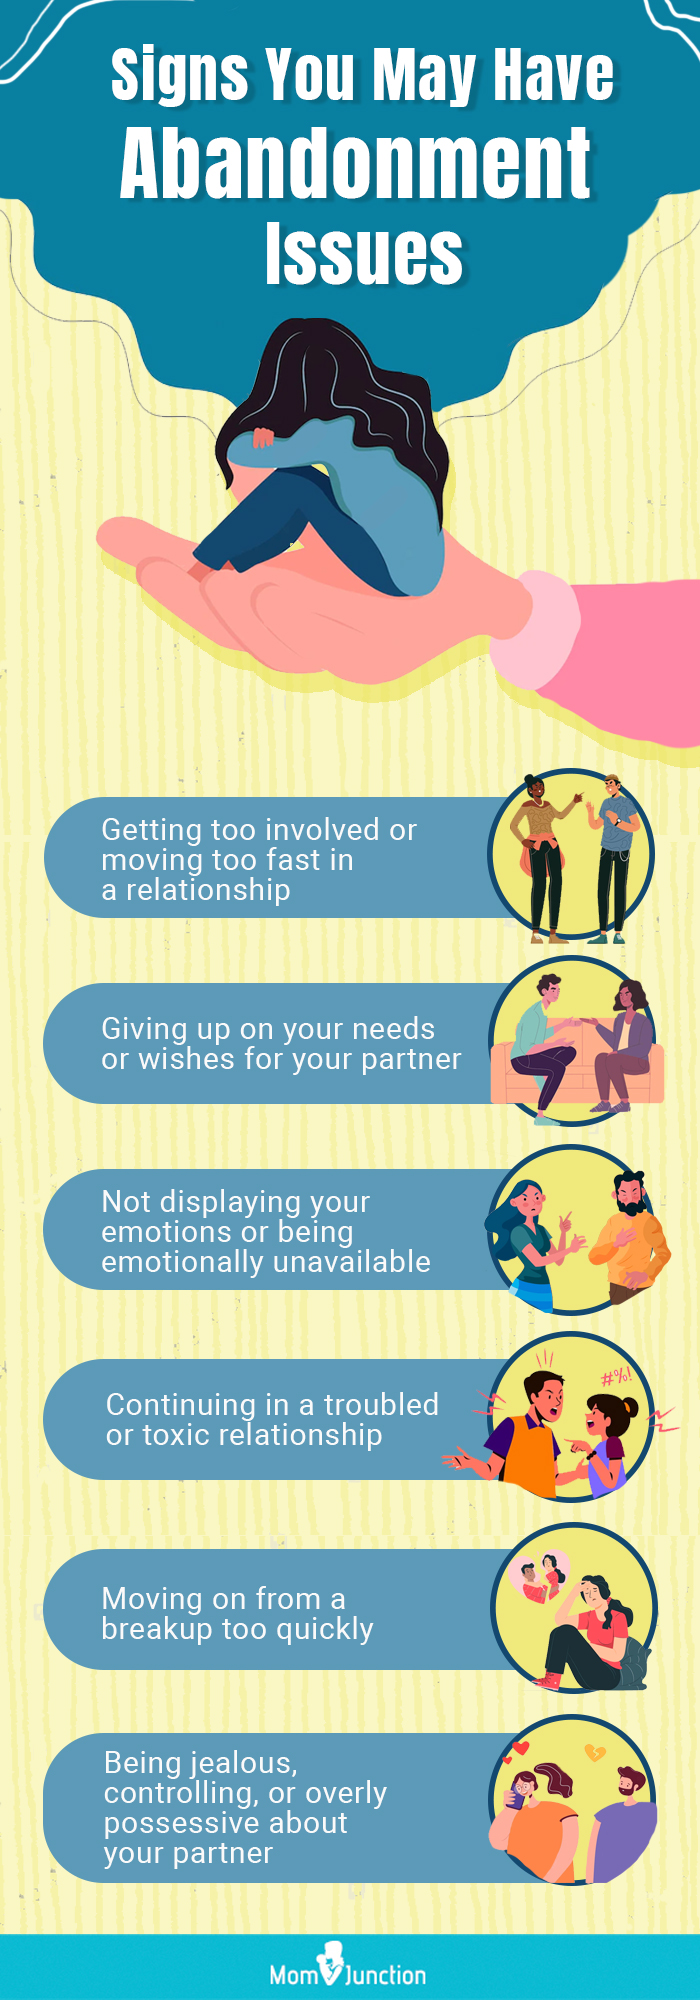 signs you may have abandonment issues (infographic)